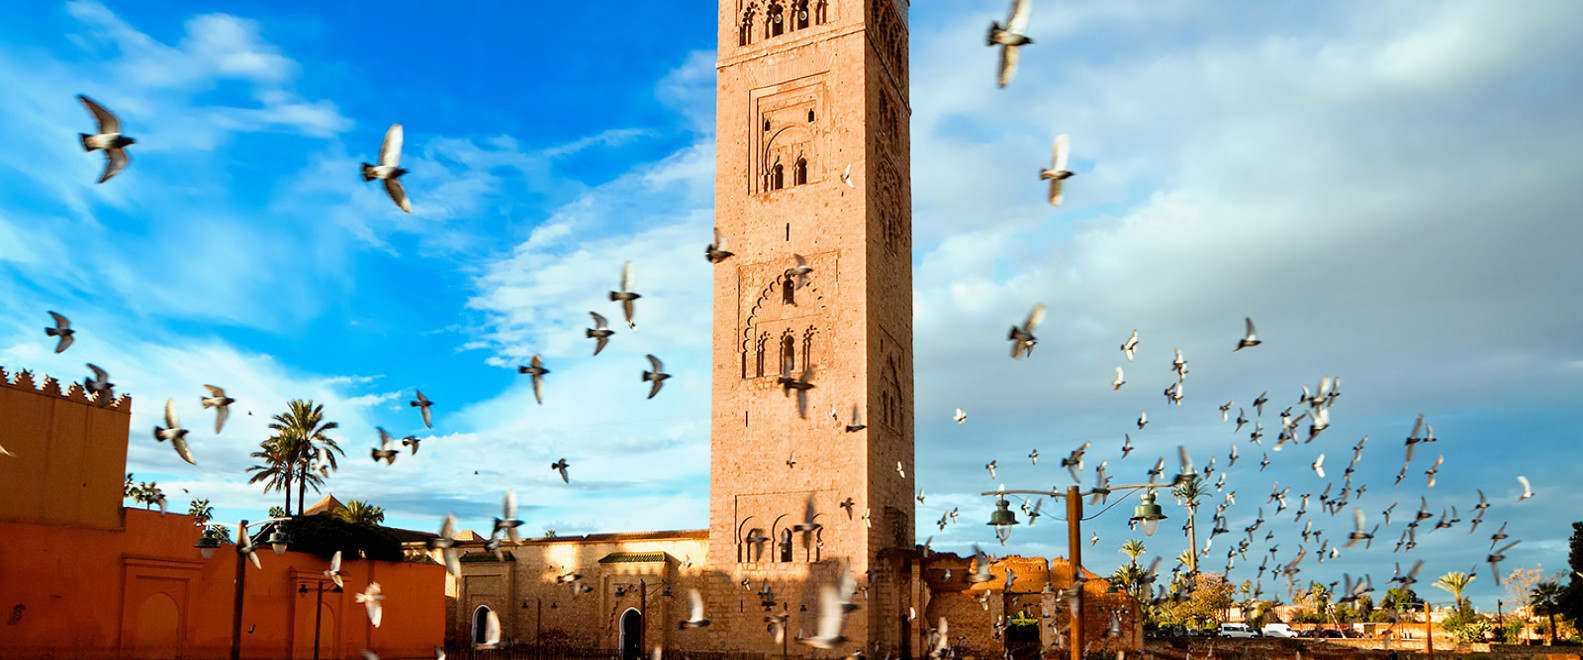 New York Times highlights Marrakesh as “a haven of Islamic architecture, dazzling traditional artisanship, cool contemporary design”